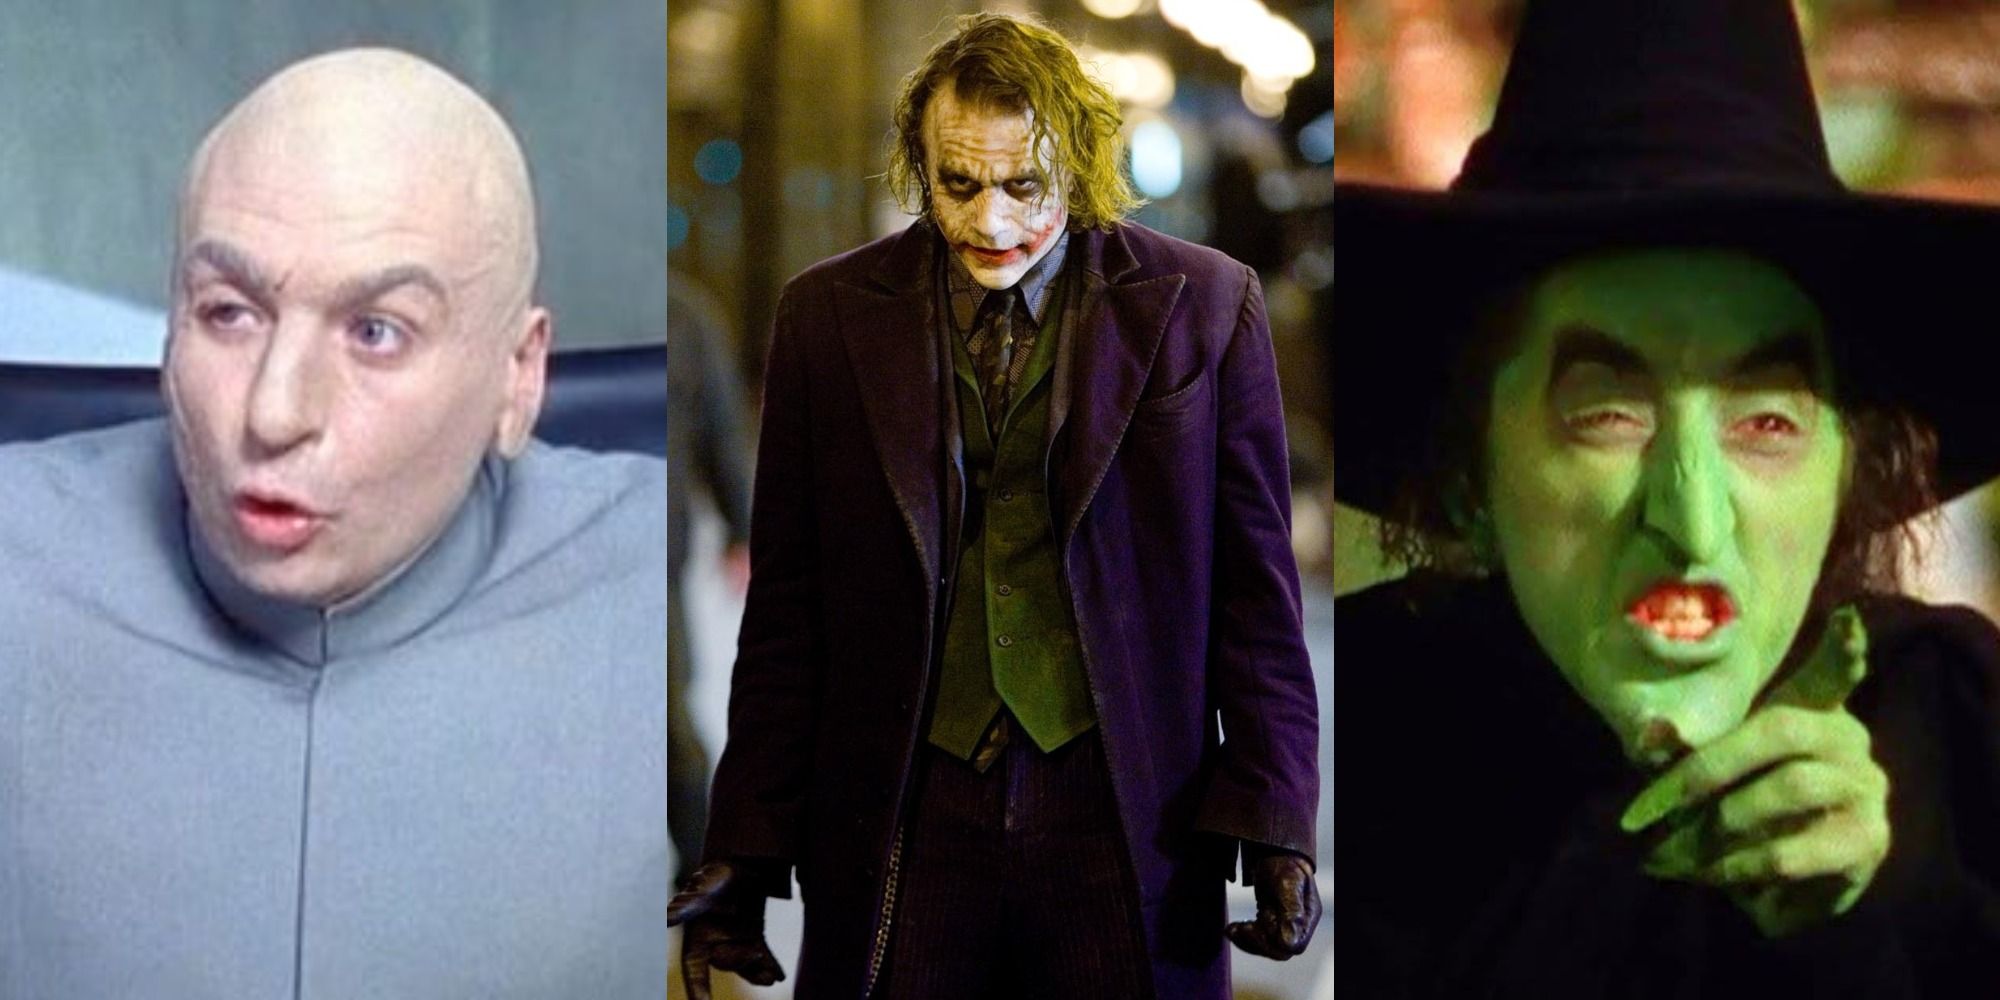 10 Movie Villains That Are More Interesting Than The Hero